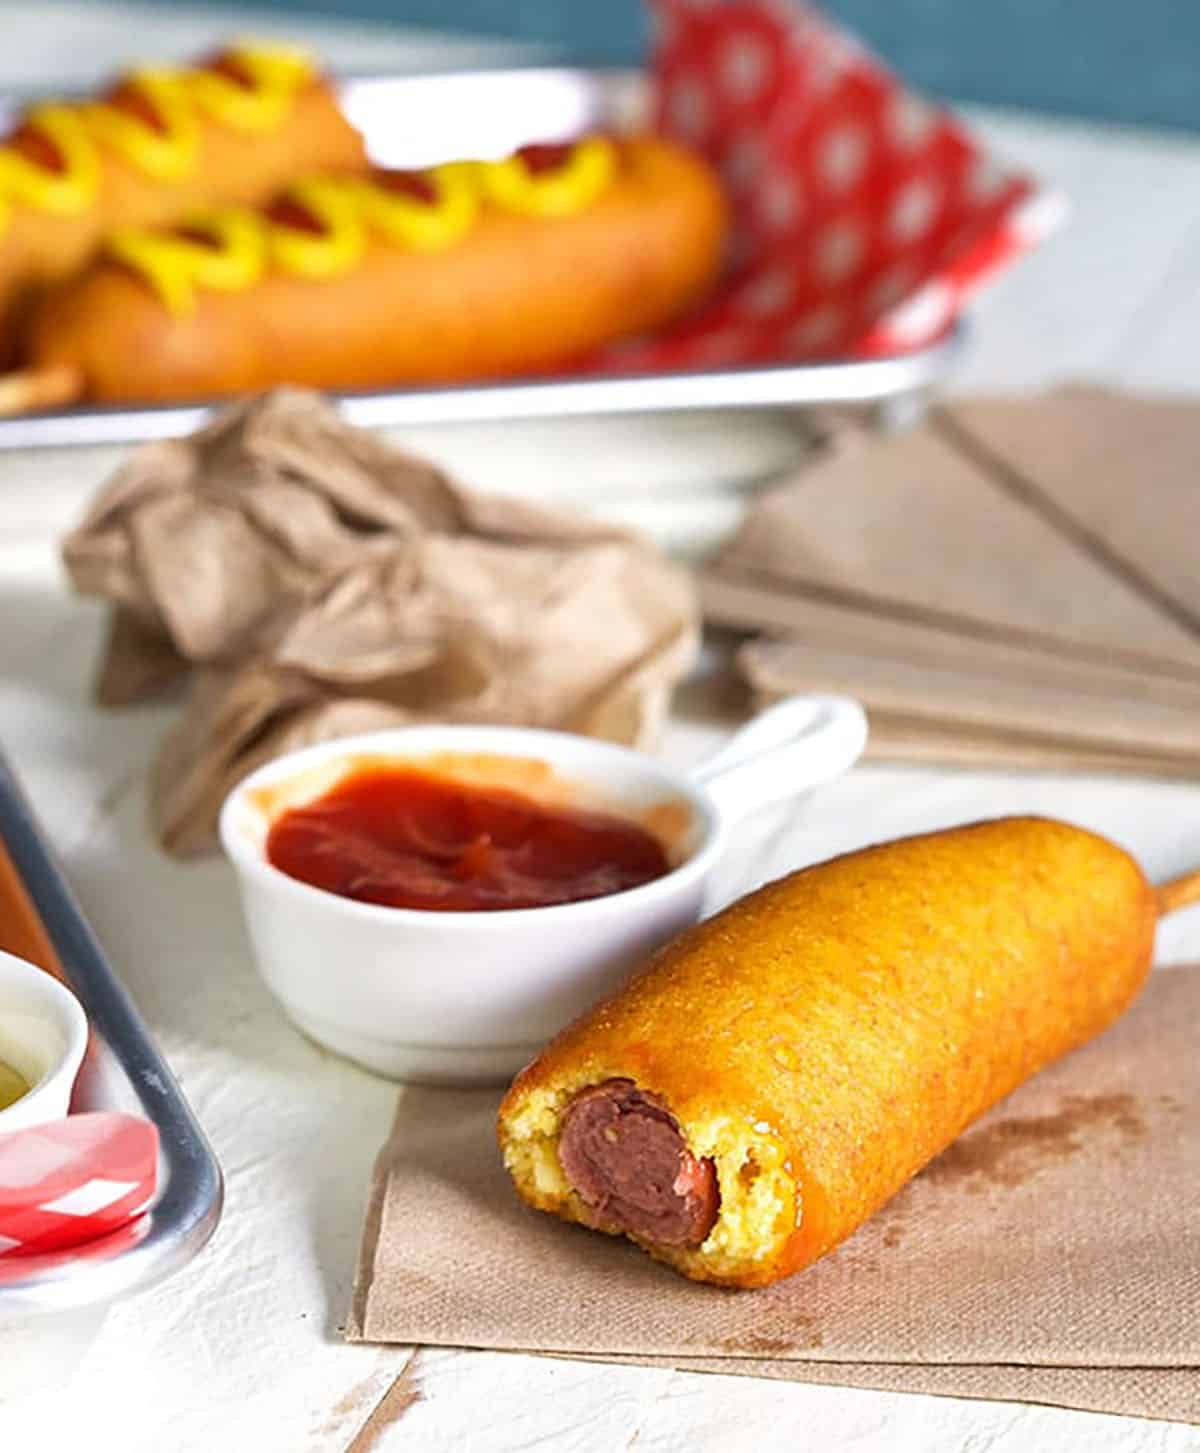 Corn dog with a bite out of it.